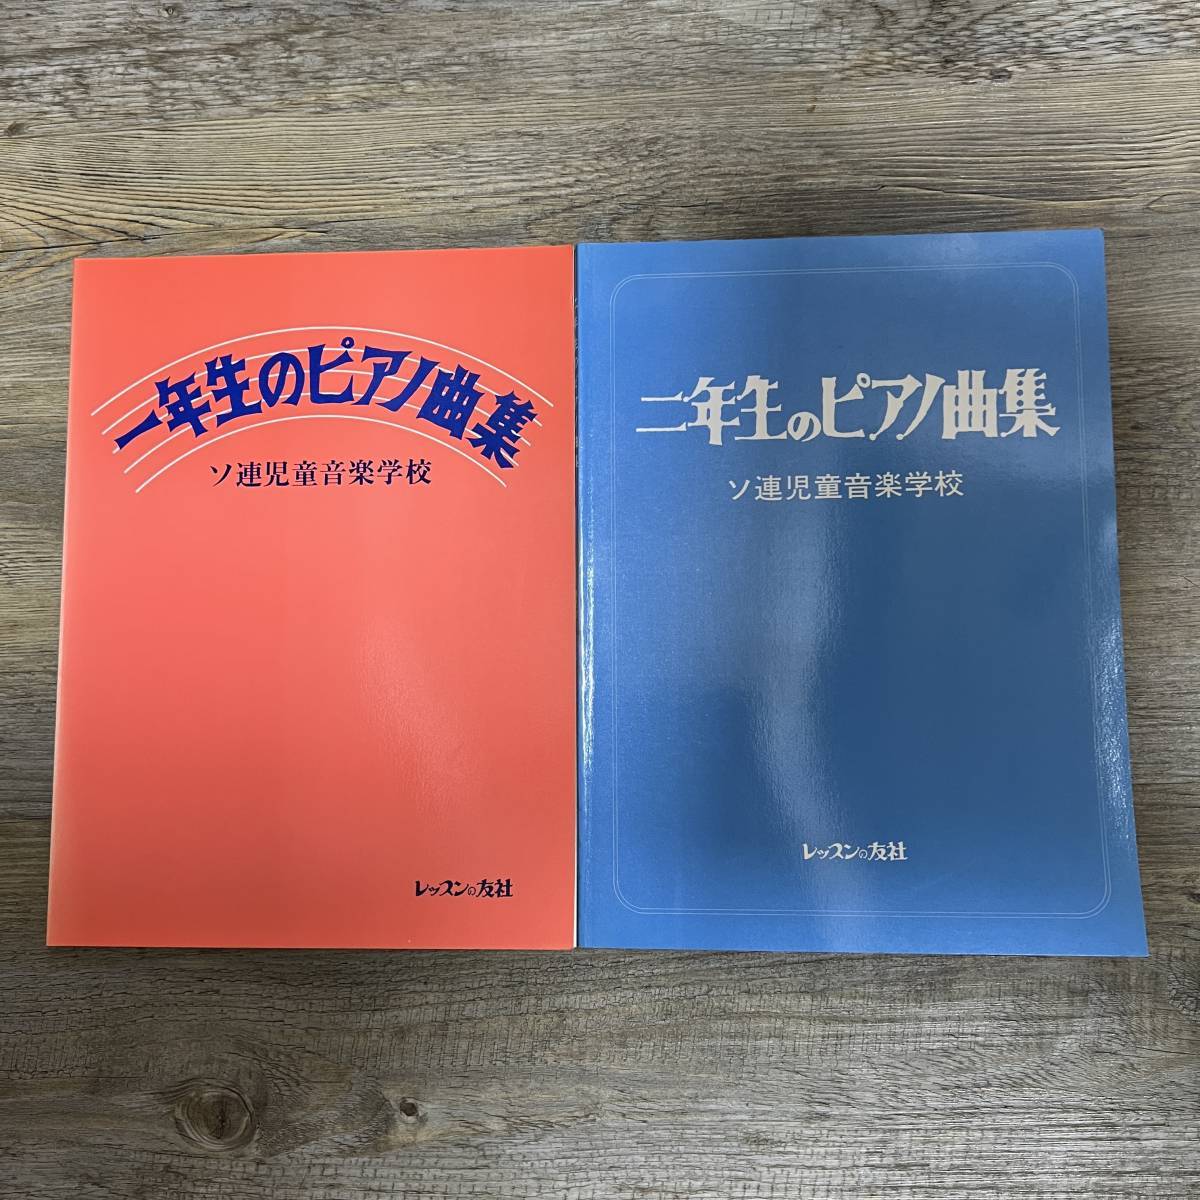 J-3452# one year raw. piano piece compilation two year raw. piano piece compilation 2 pcs. set #so ream children's music school # piano musical score piano textbook # lesson. . company # Showa era 61 year issue 